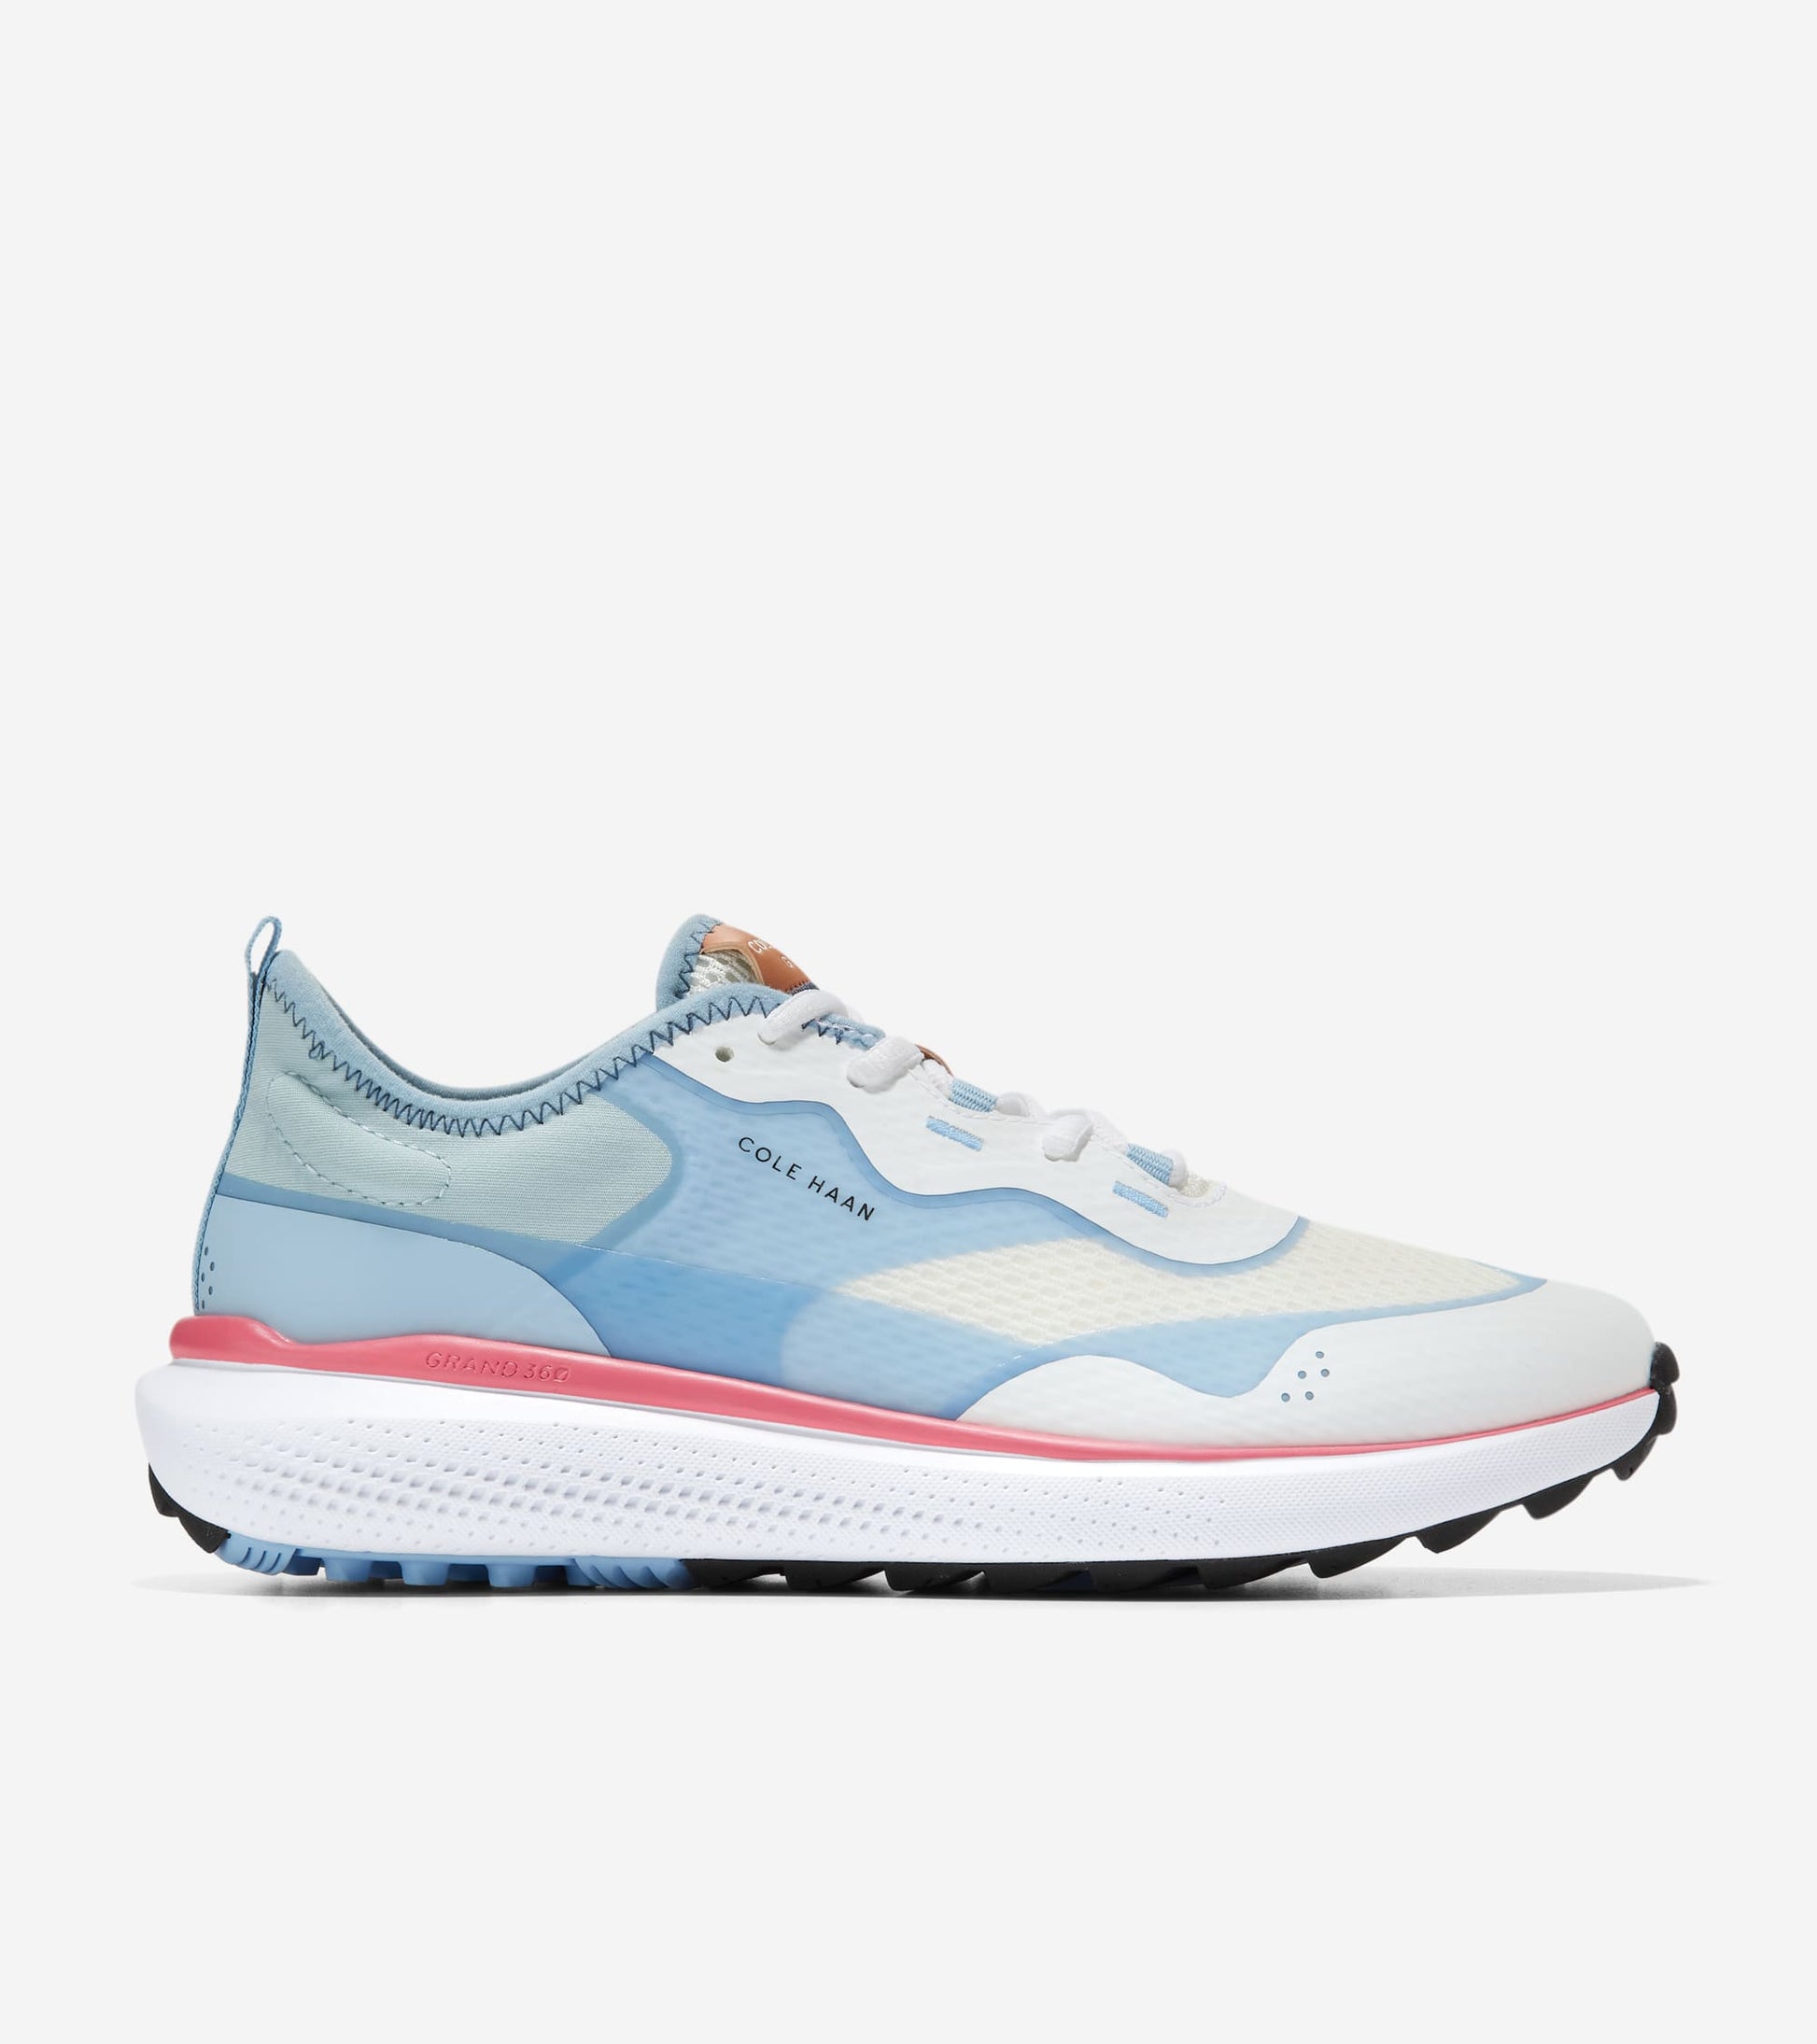 W26783:OPTIC WHITE/BLUE BELL/SUN KISSED CORAL (8086477111543)